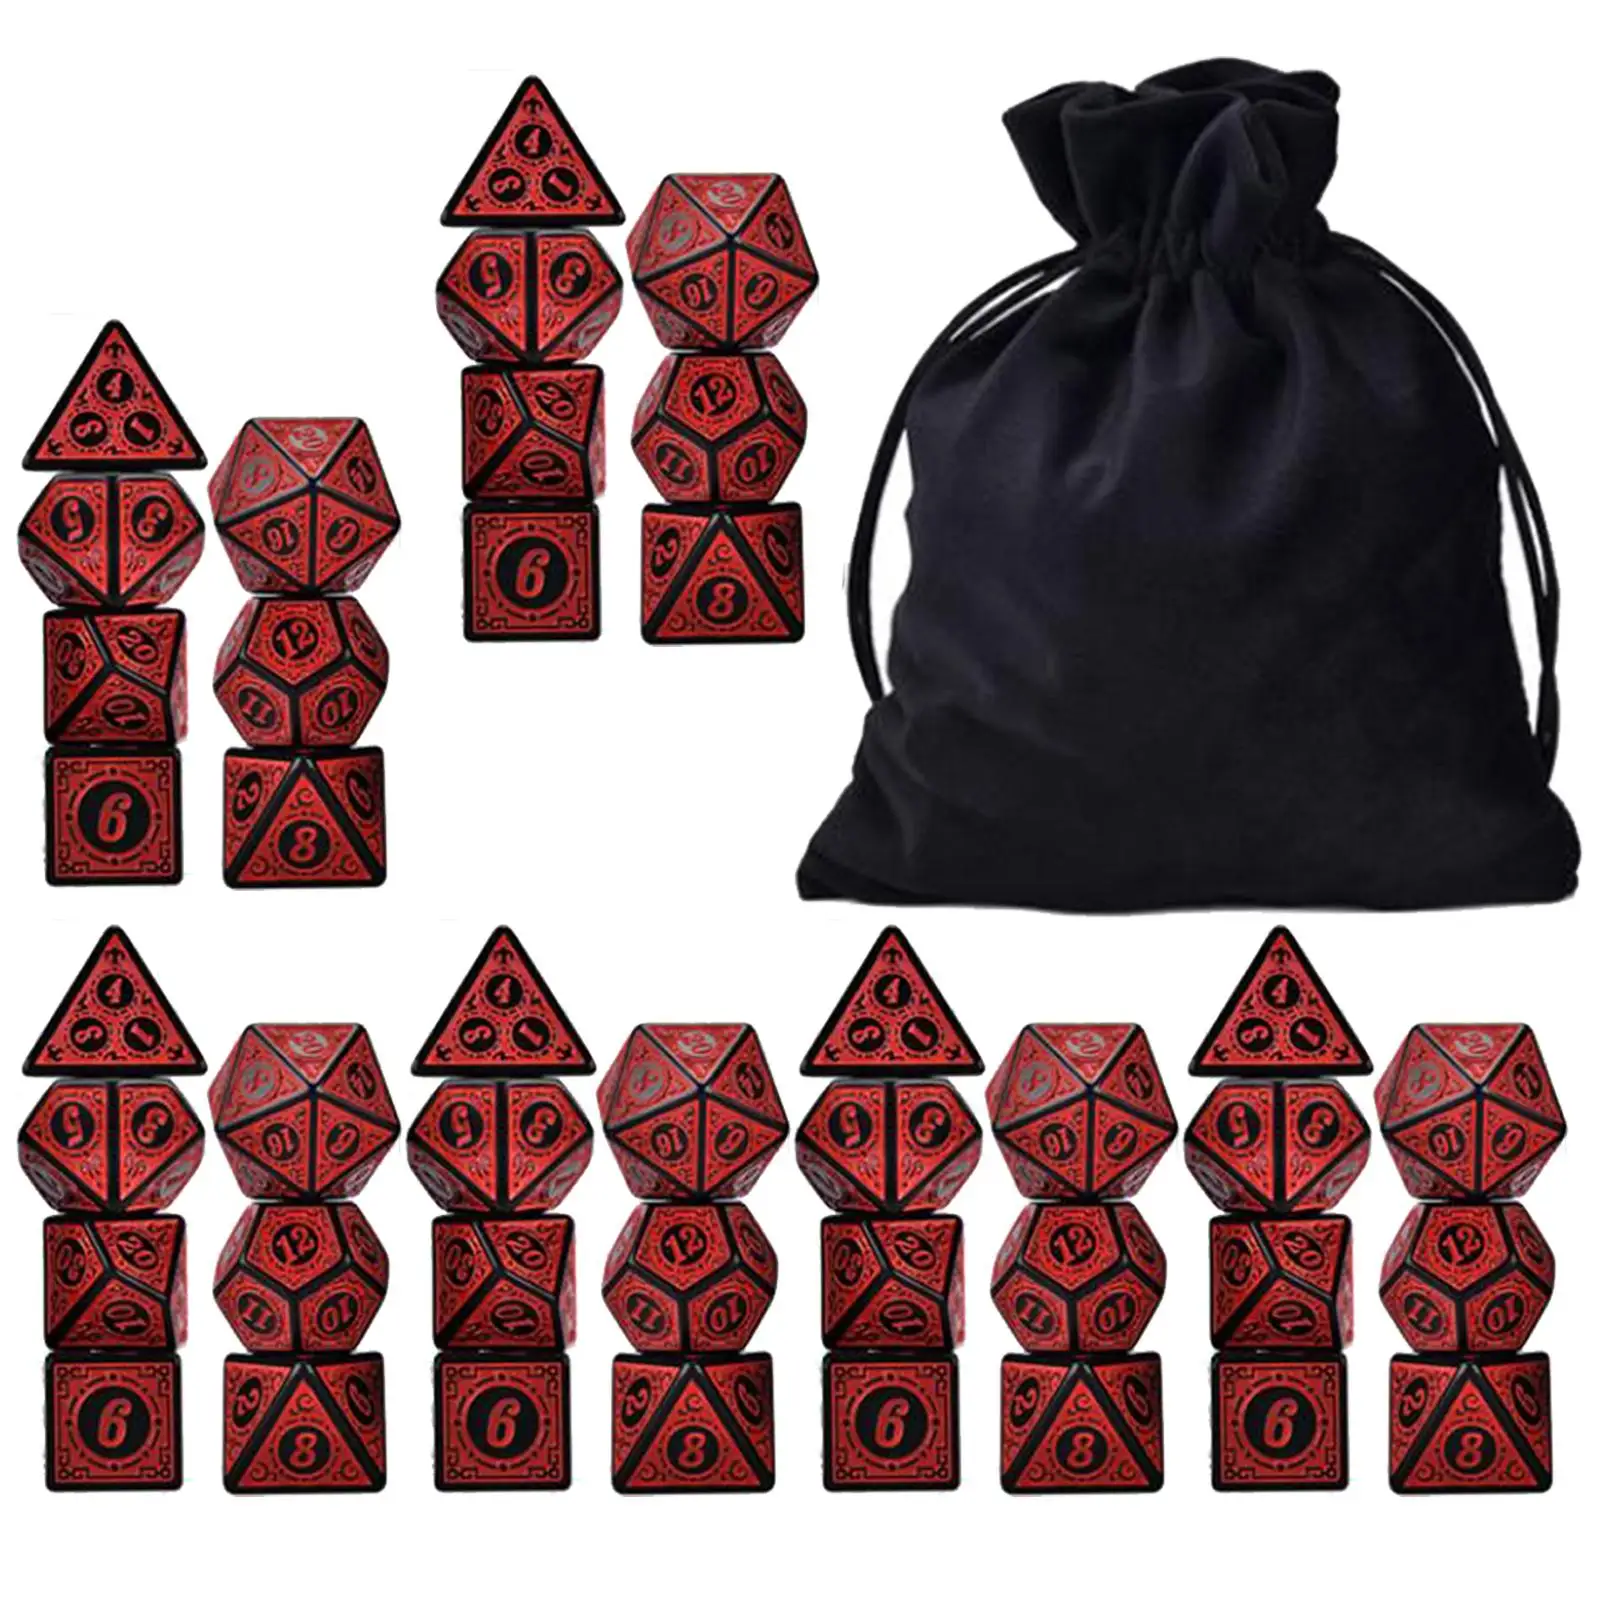 42pcs Acrylic Polyhedral Dice Set with Pouches D4 D6 D8 D10 D12 D20 for MTG DND RPG Board Game Bar Toys